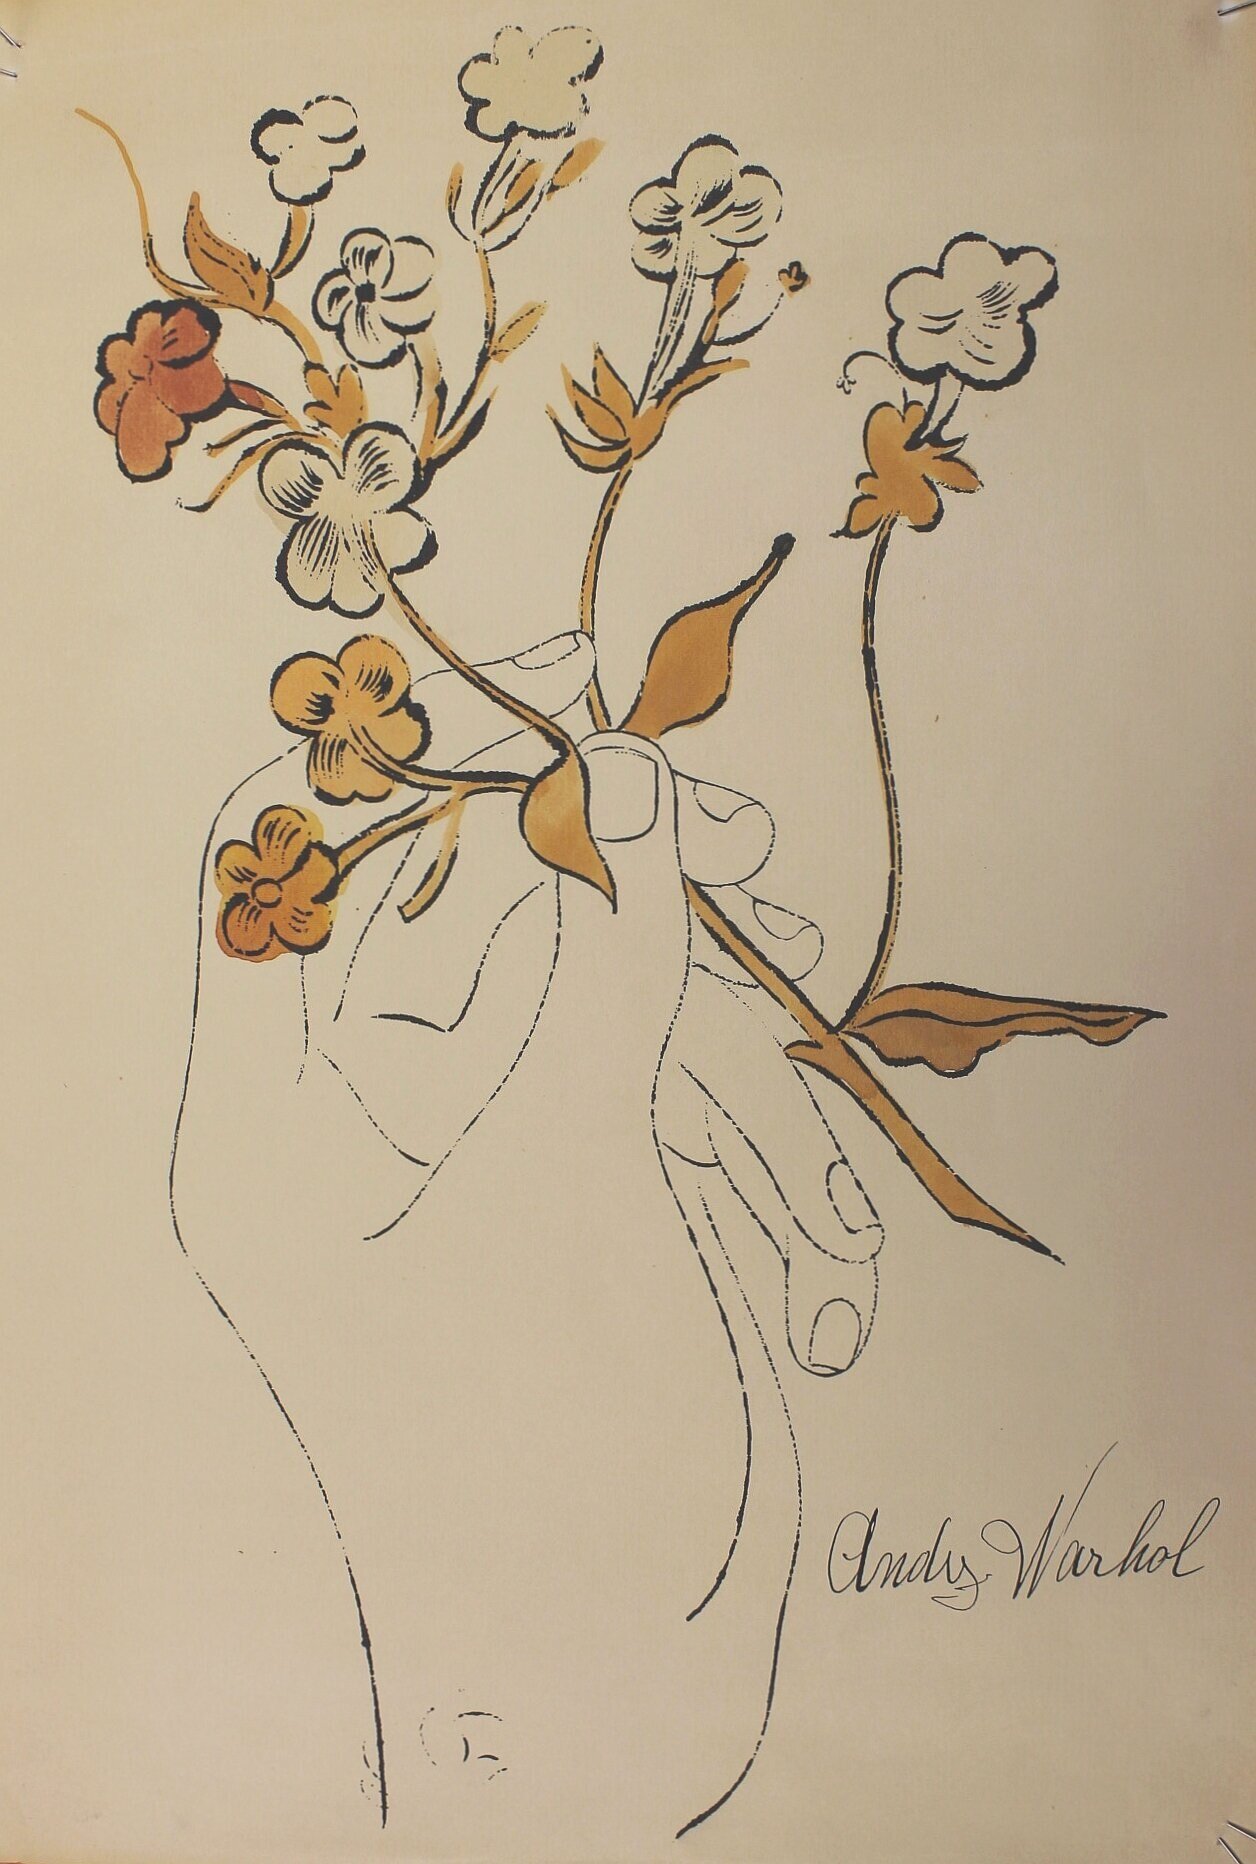 Andy Warhol, Hand Holding Flowers, 1957